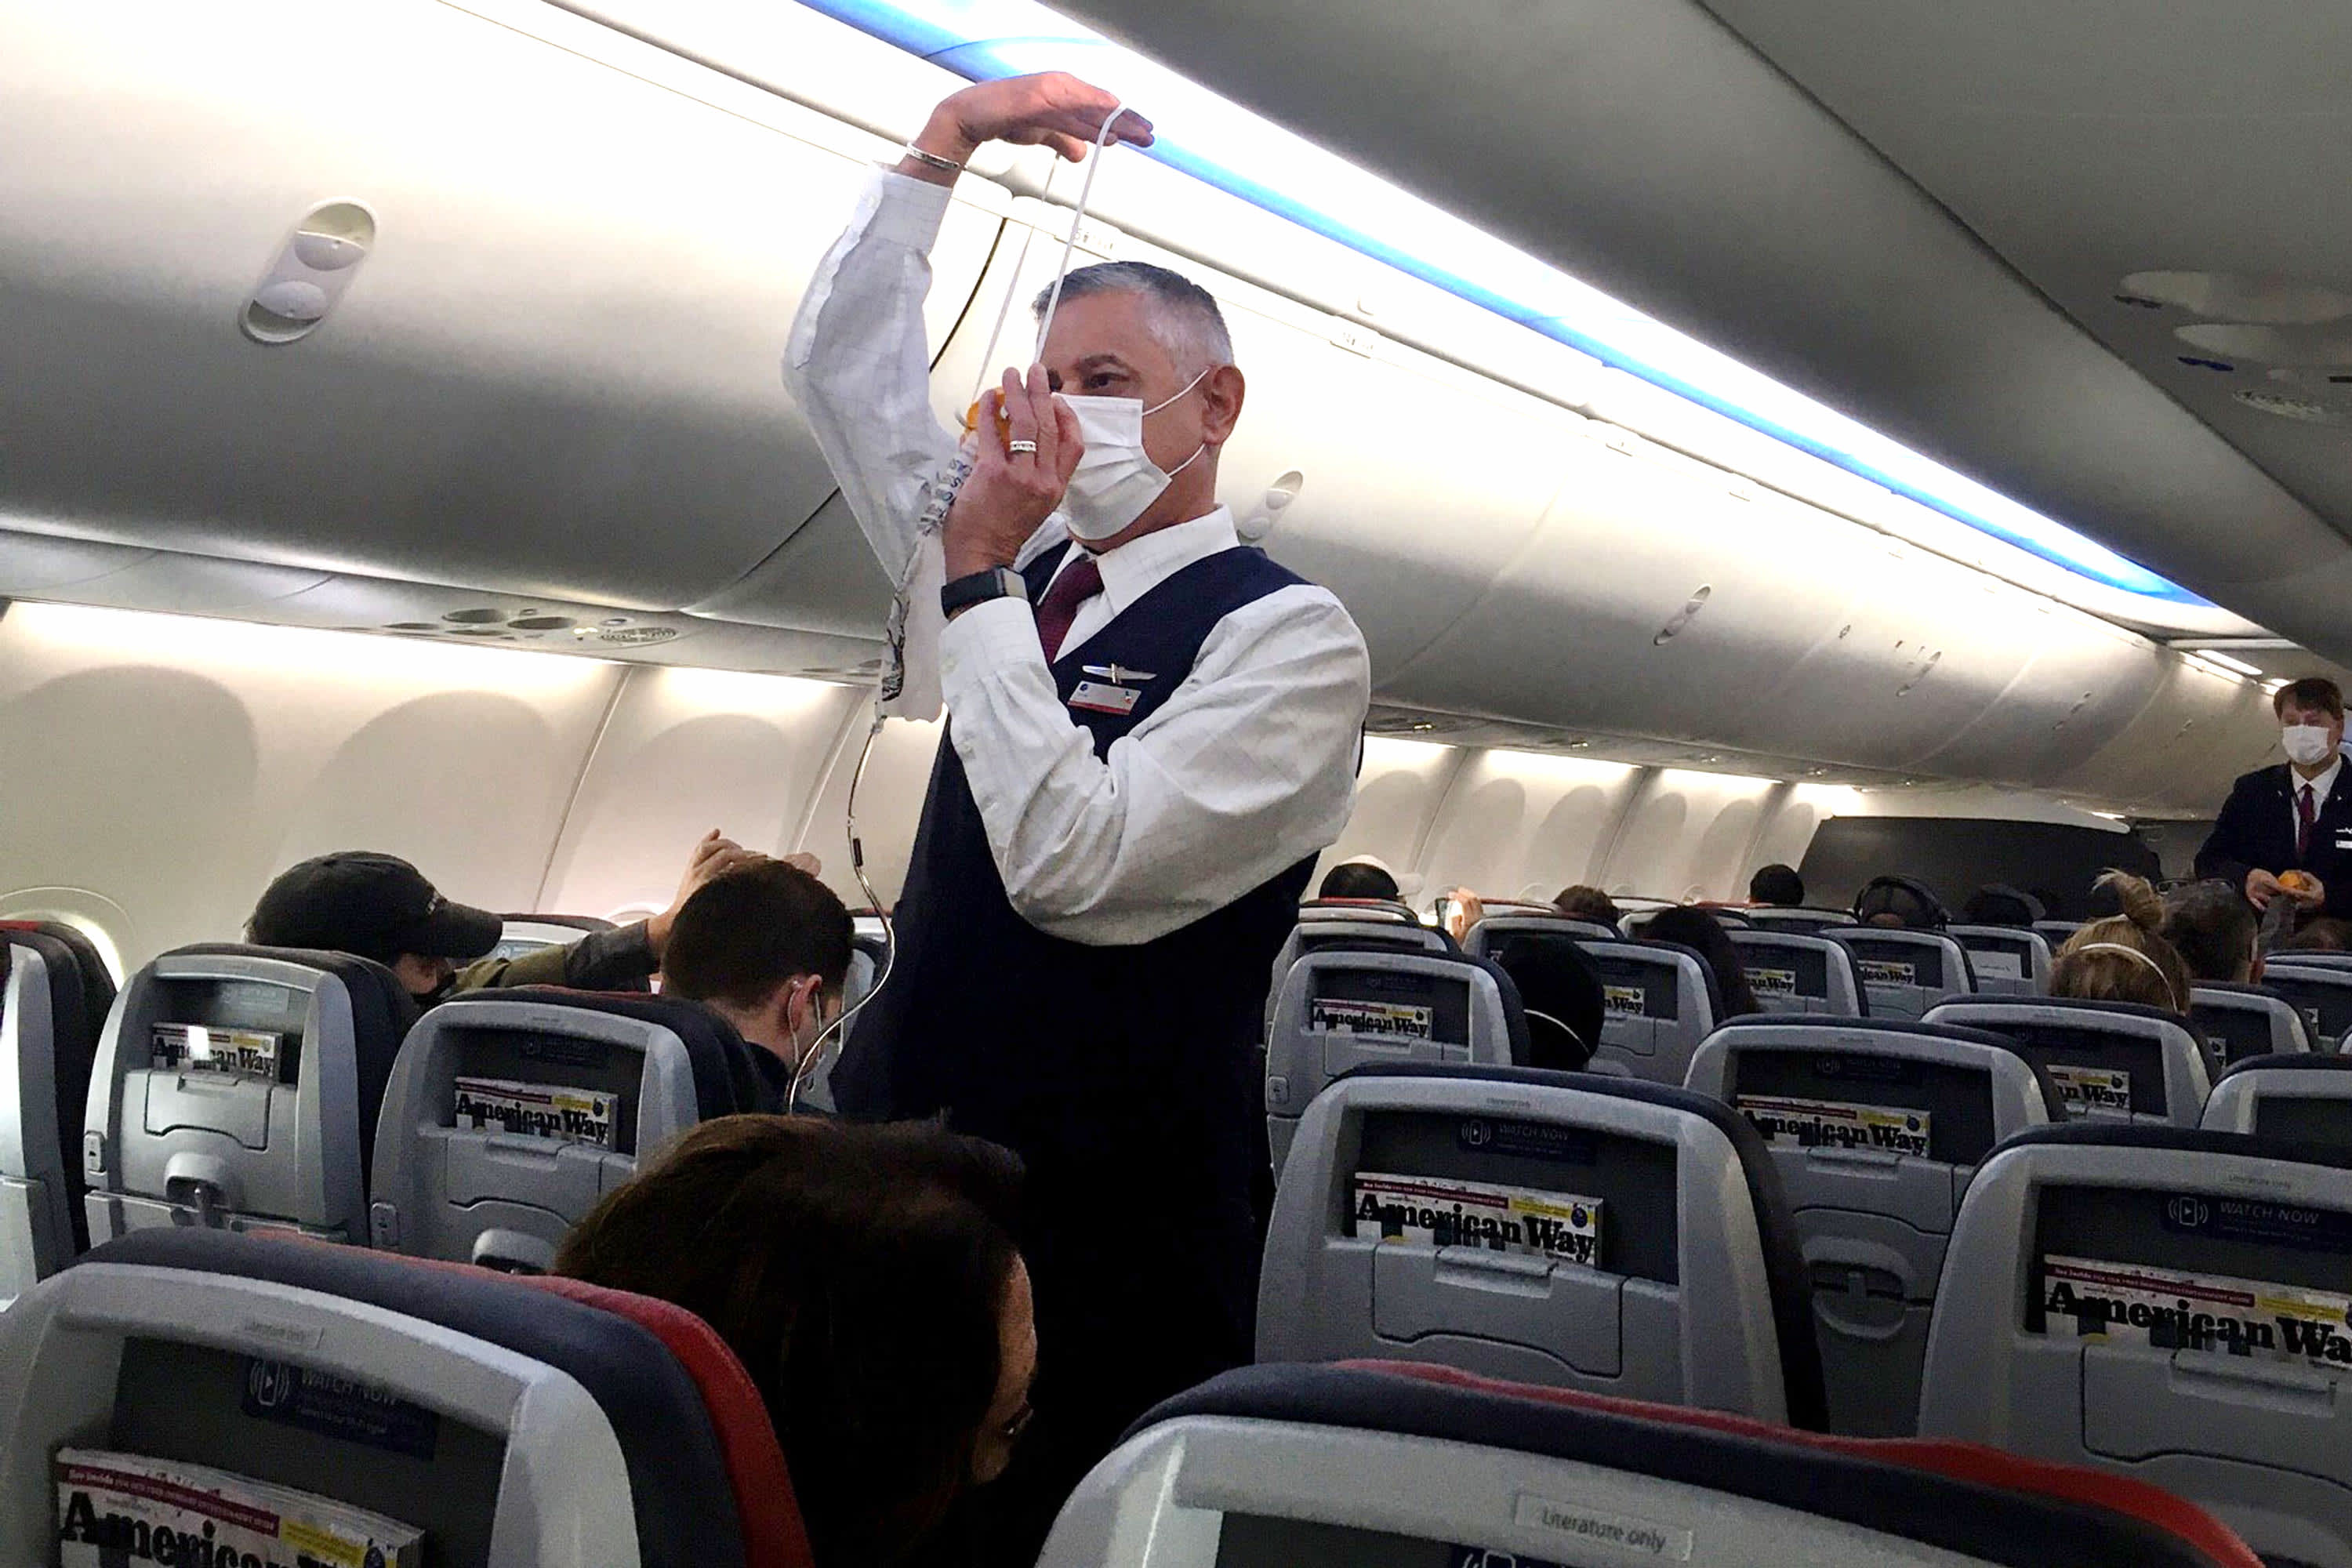 The FAA extends the zero-tolerance policy for unruly passengers